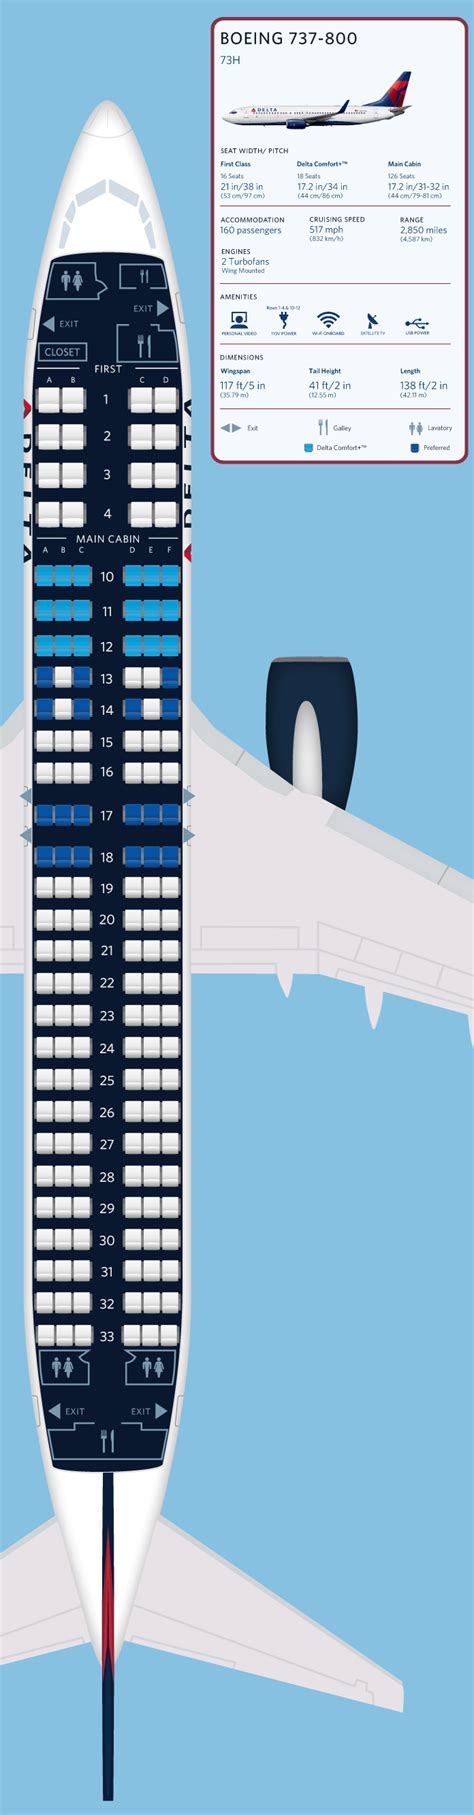 Boeing 737 800 Seating Chart Delta